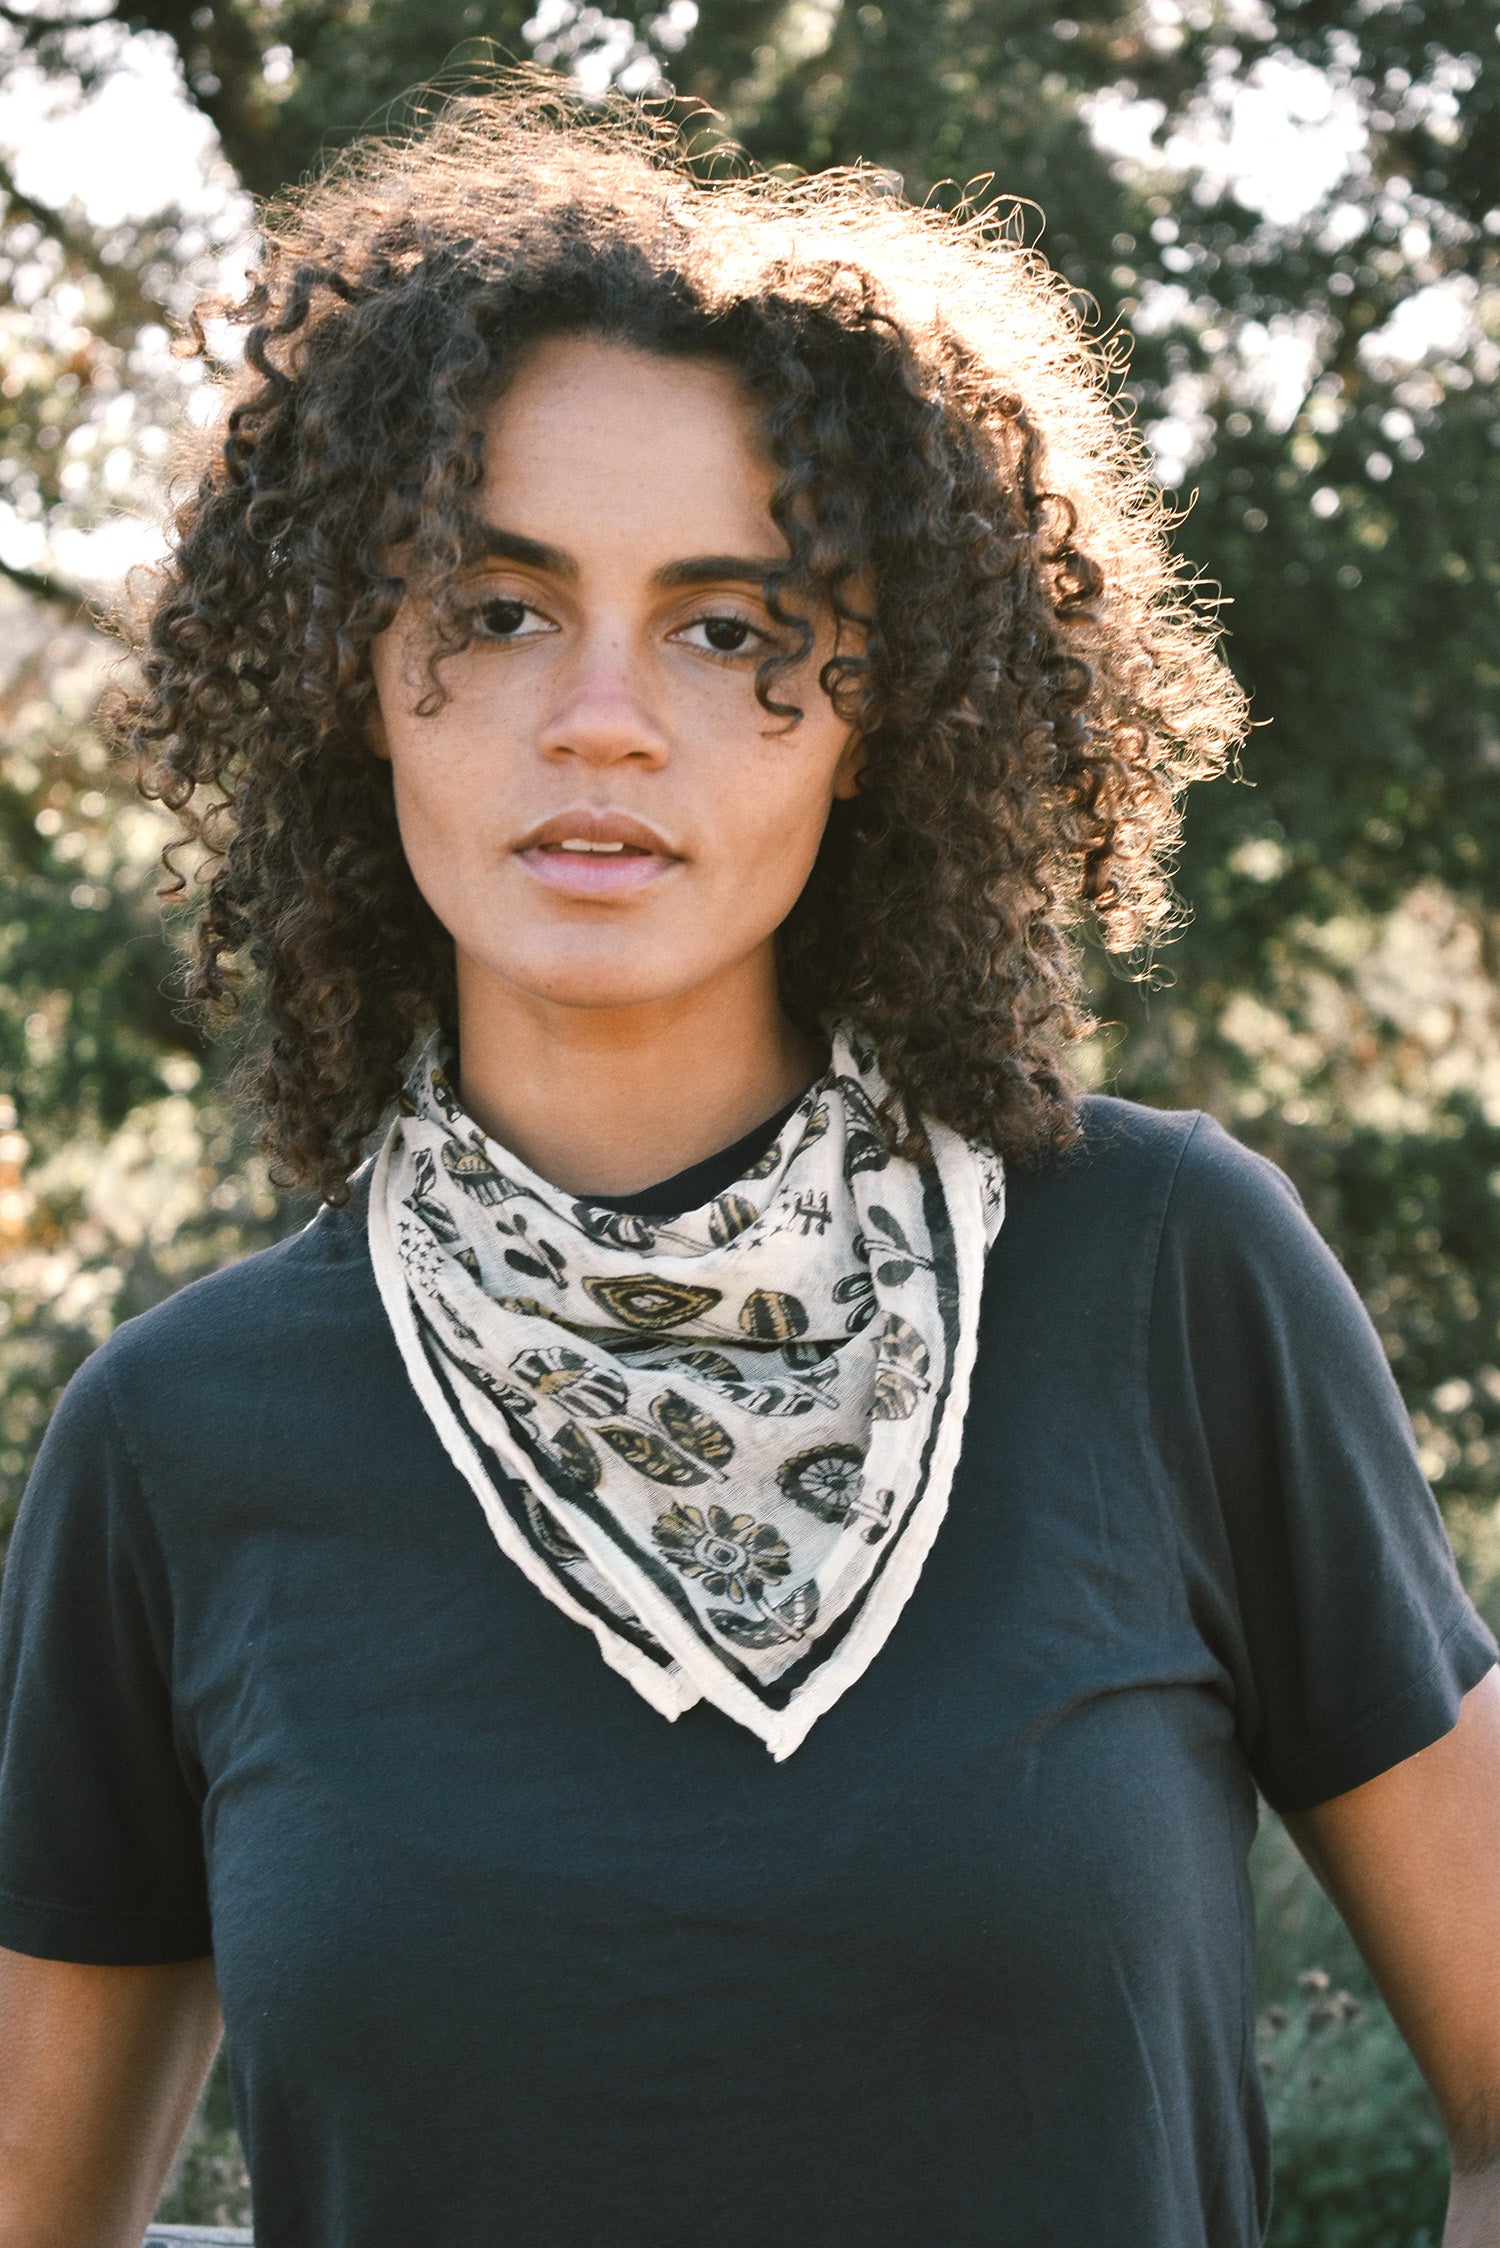 Woman wearing block print Paradise bandana tied around neck against a black tee shirt. Trees are in the background.